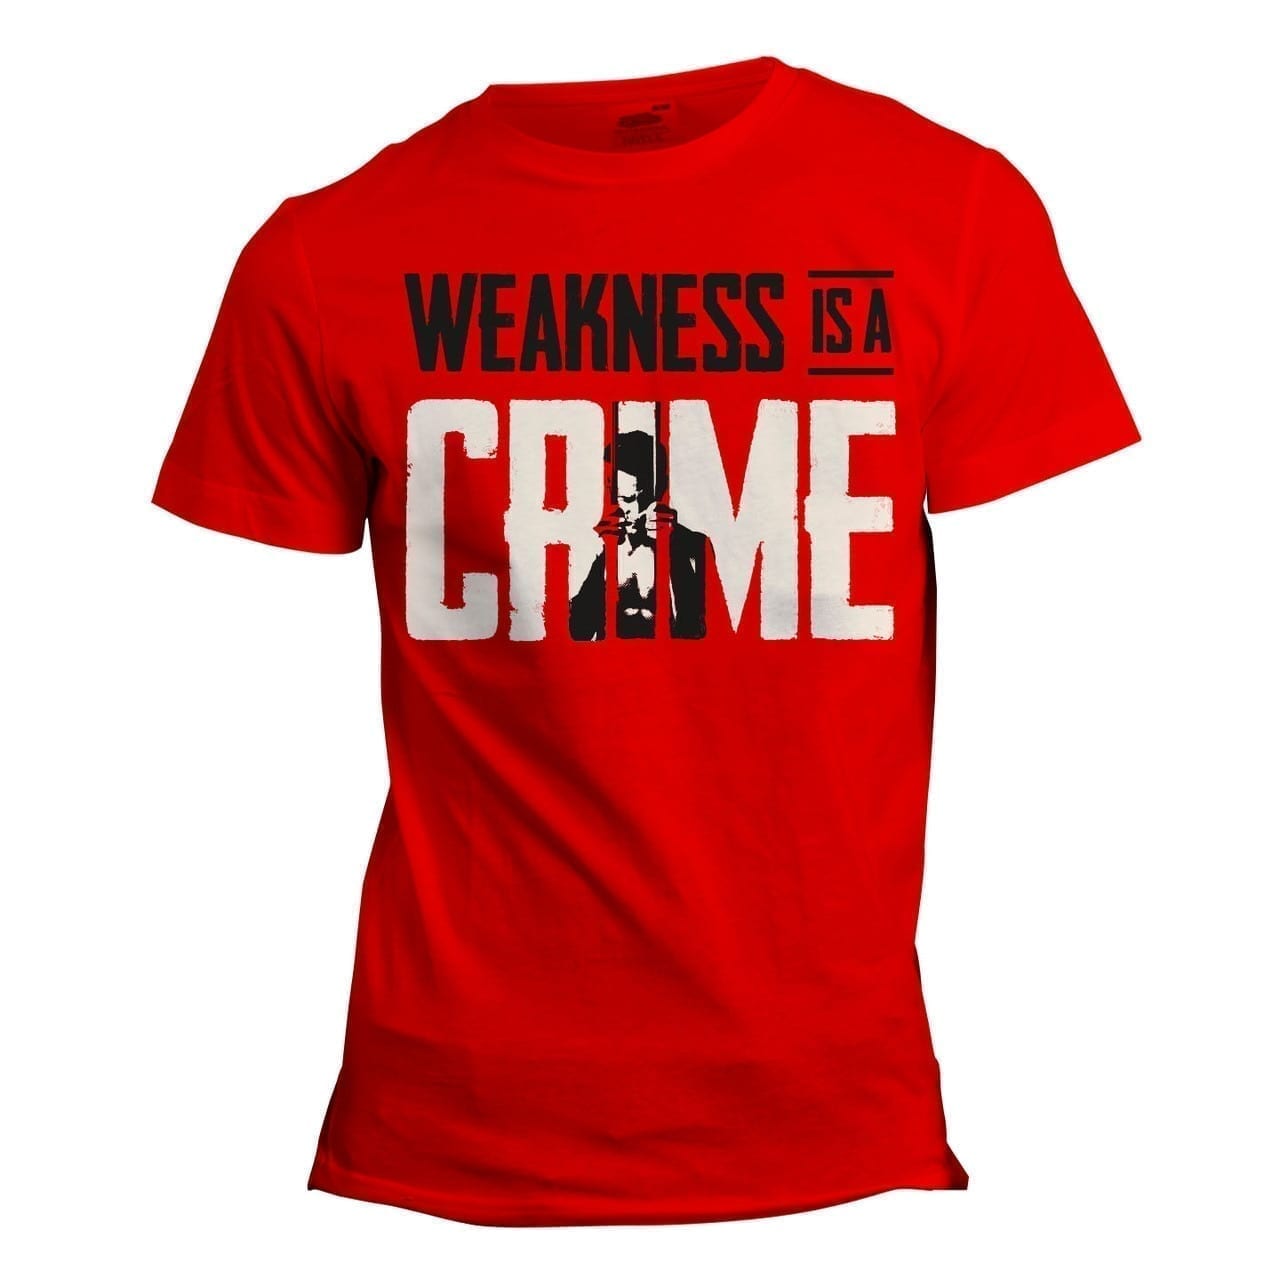 Weakness is a Crime